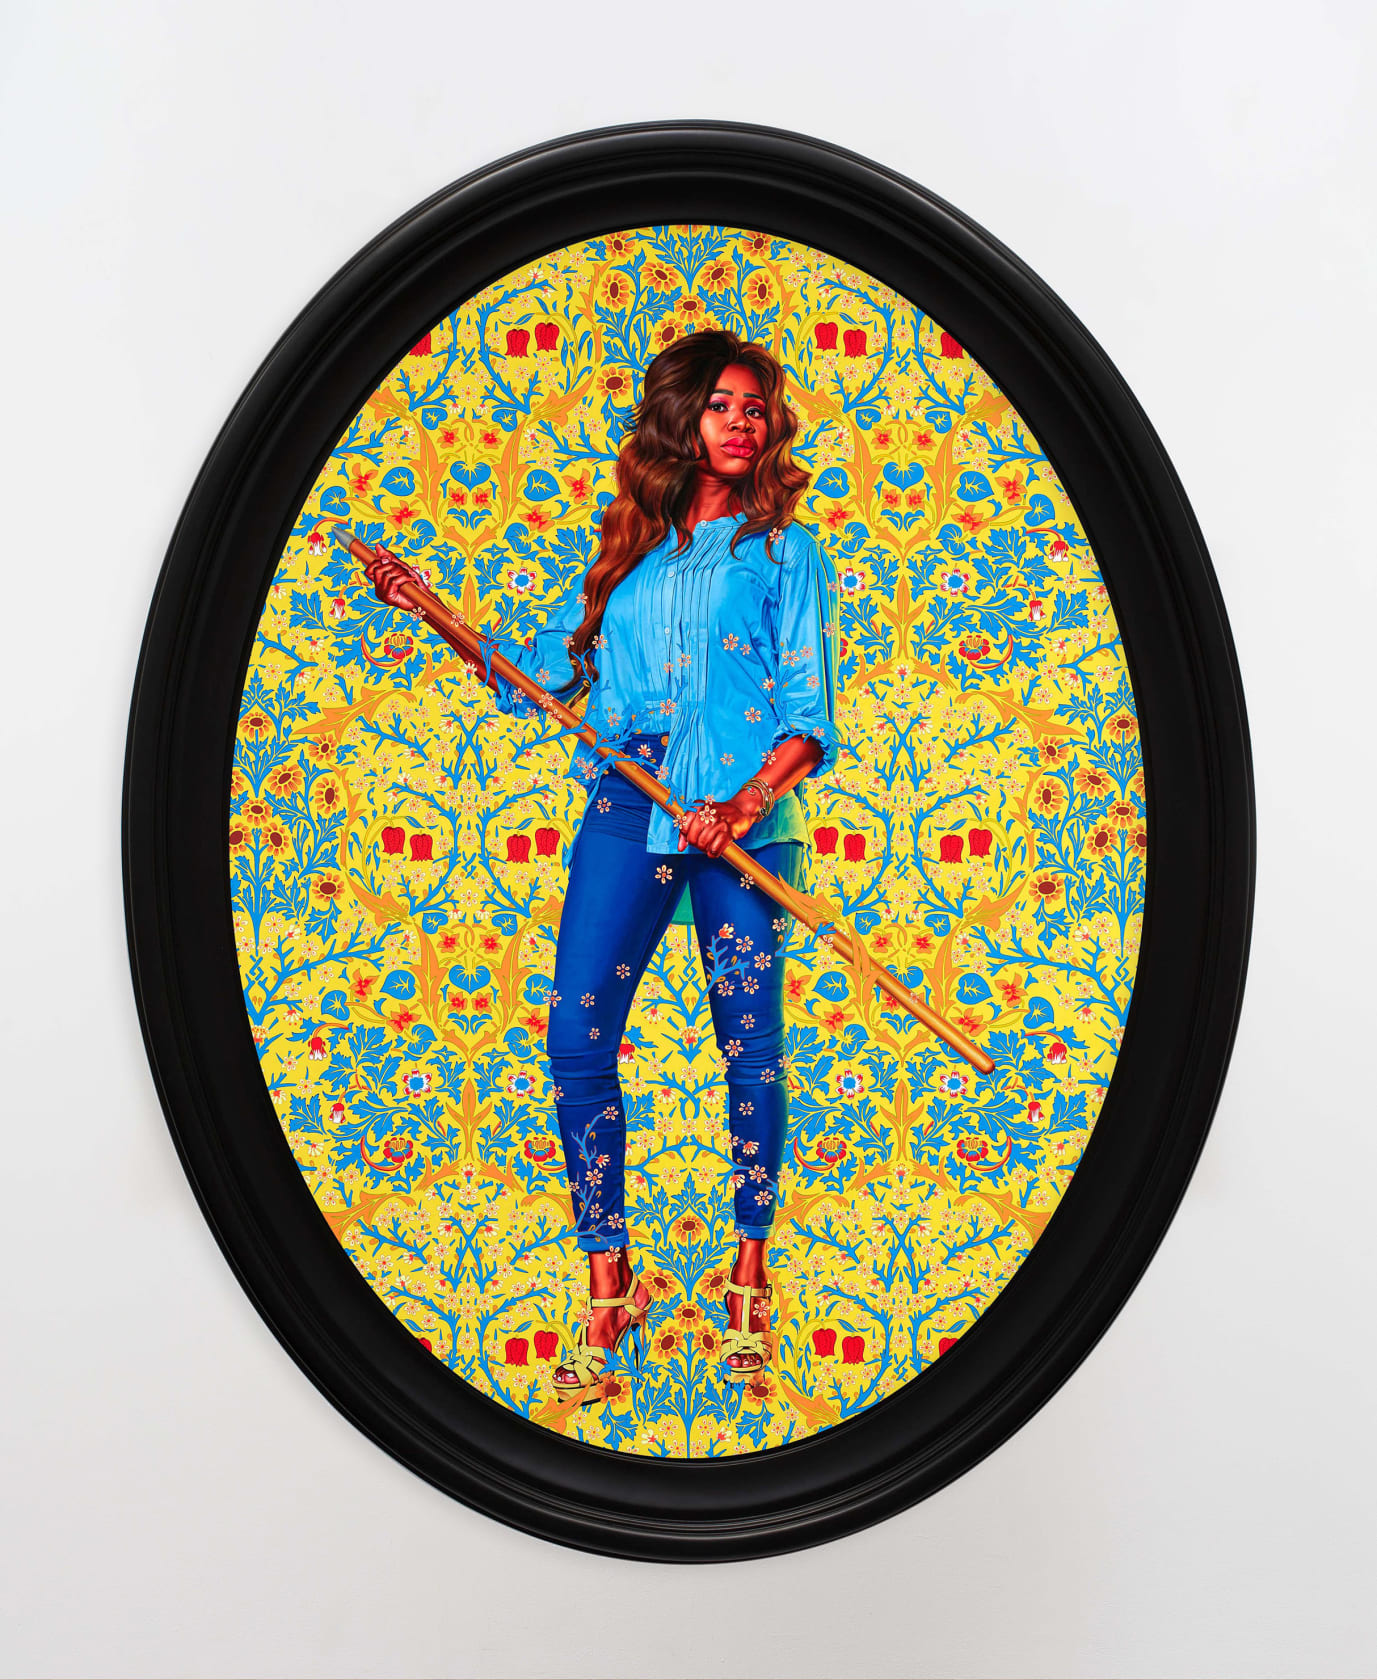 Kehinde Wiley | The Yellow Wallpaper, William Morrison Gallery, London, England February 22 - July 12 2020 | 5